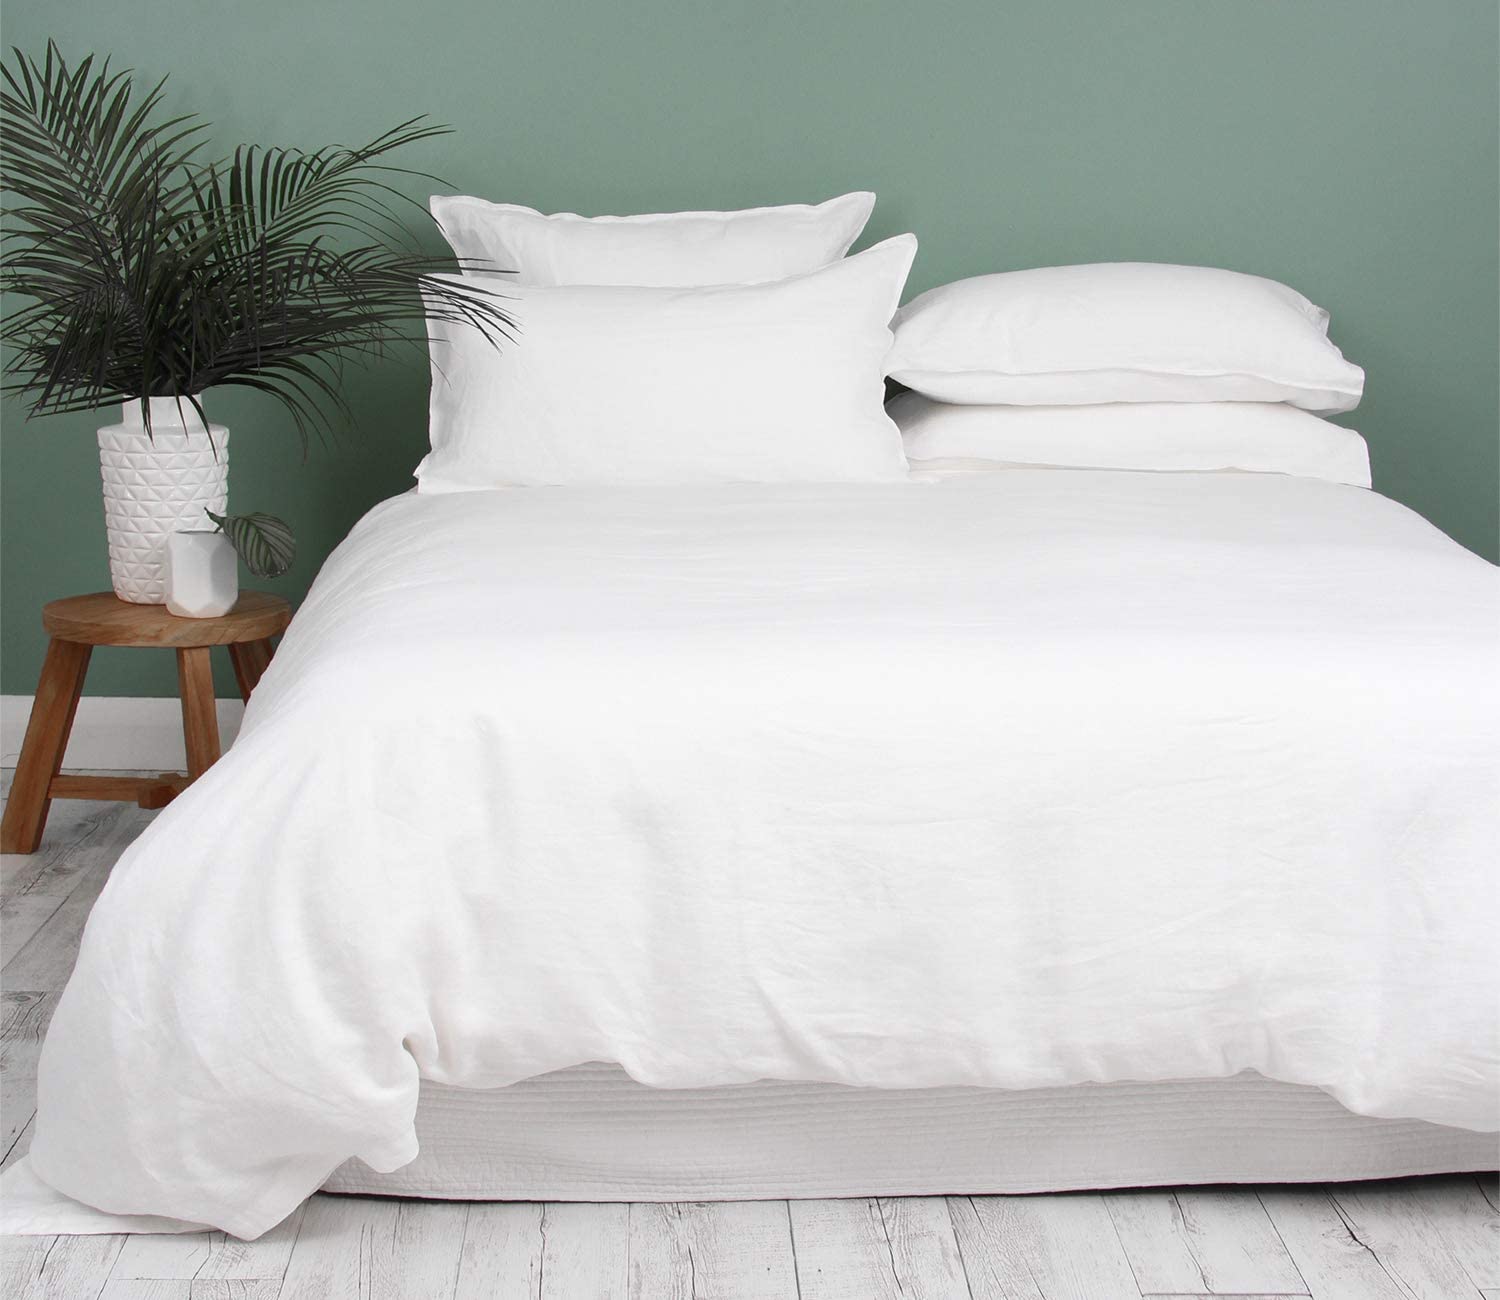 Price:$77.49  Homes 1000 Thread Count White King Duvet Cover, 100% Long Staple Egyptian Cotton Quilt Cover King/Cal King Size, Silky Soft, Breathable with Hidden Zipper Closure (1 Piece Duvet Cover) : Home & Kitchen